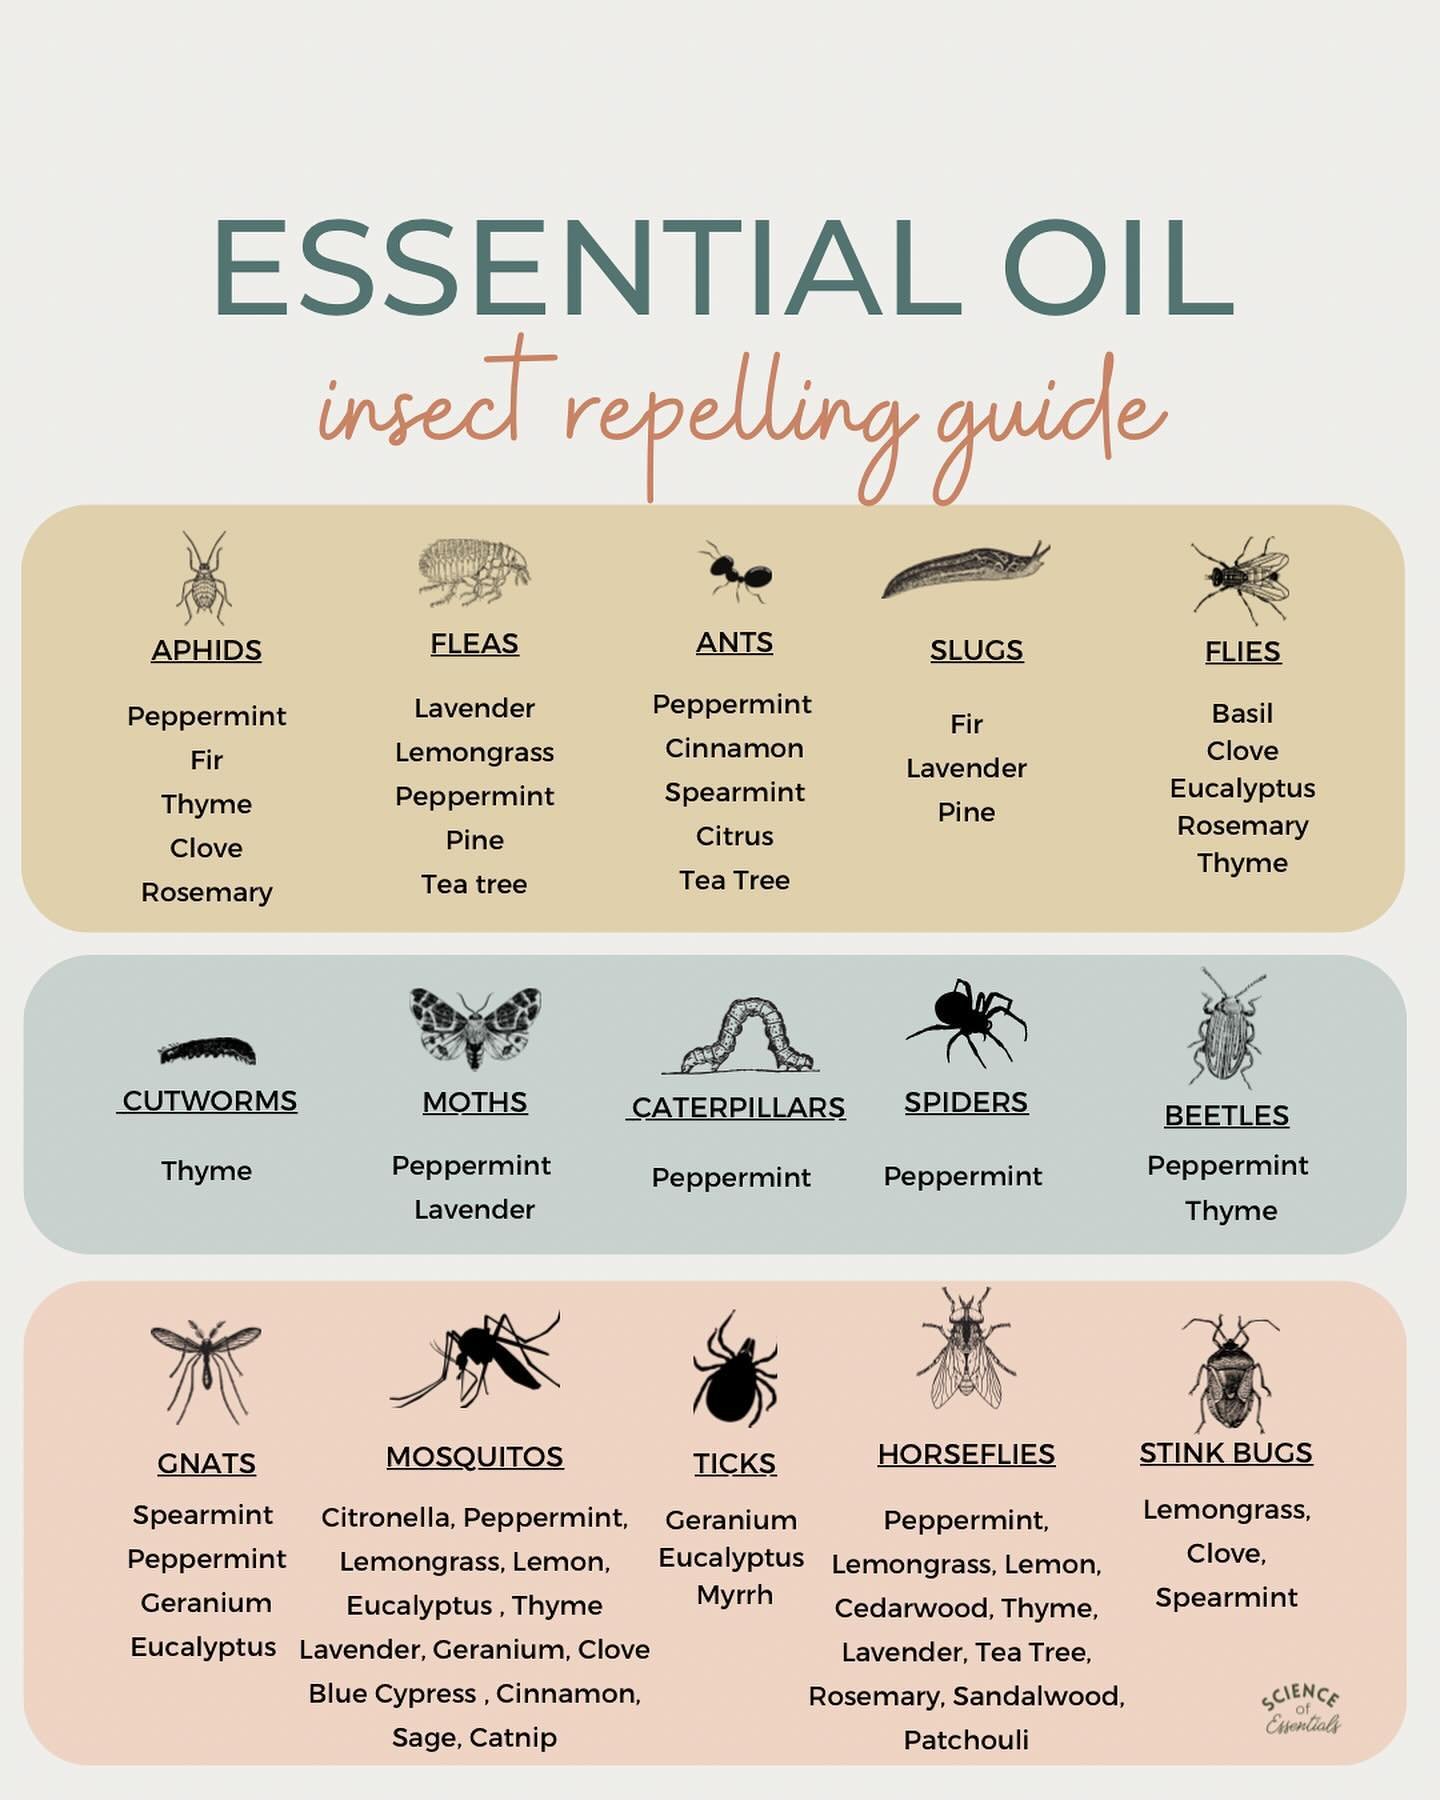 If your spring is full of weeding or wild adventures, I hope this guide helps you! Scroll left for some fun resources and recipes.

Does anyone else agree that the bugs are in full force this year?
.
.
.
.
..
.
.
.

#essentialoils #holistic #scienceo